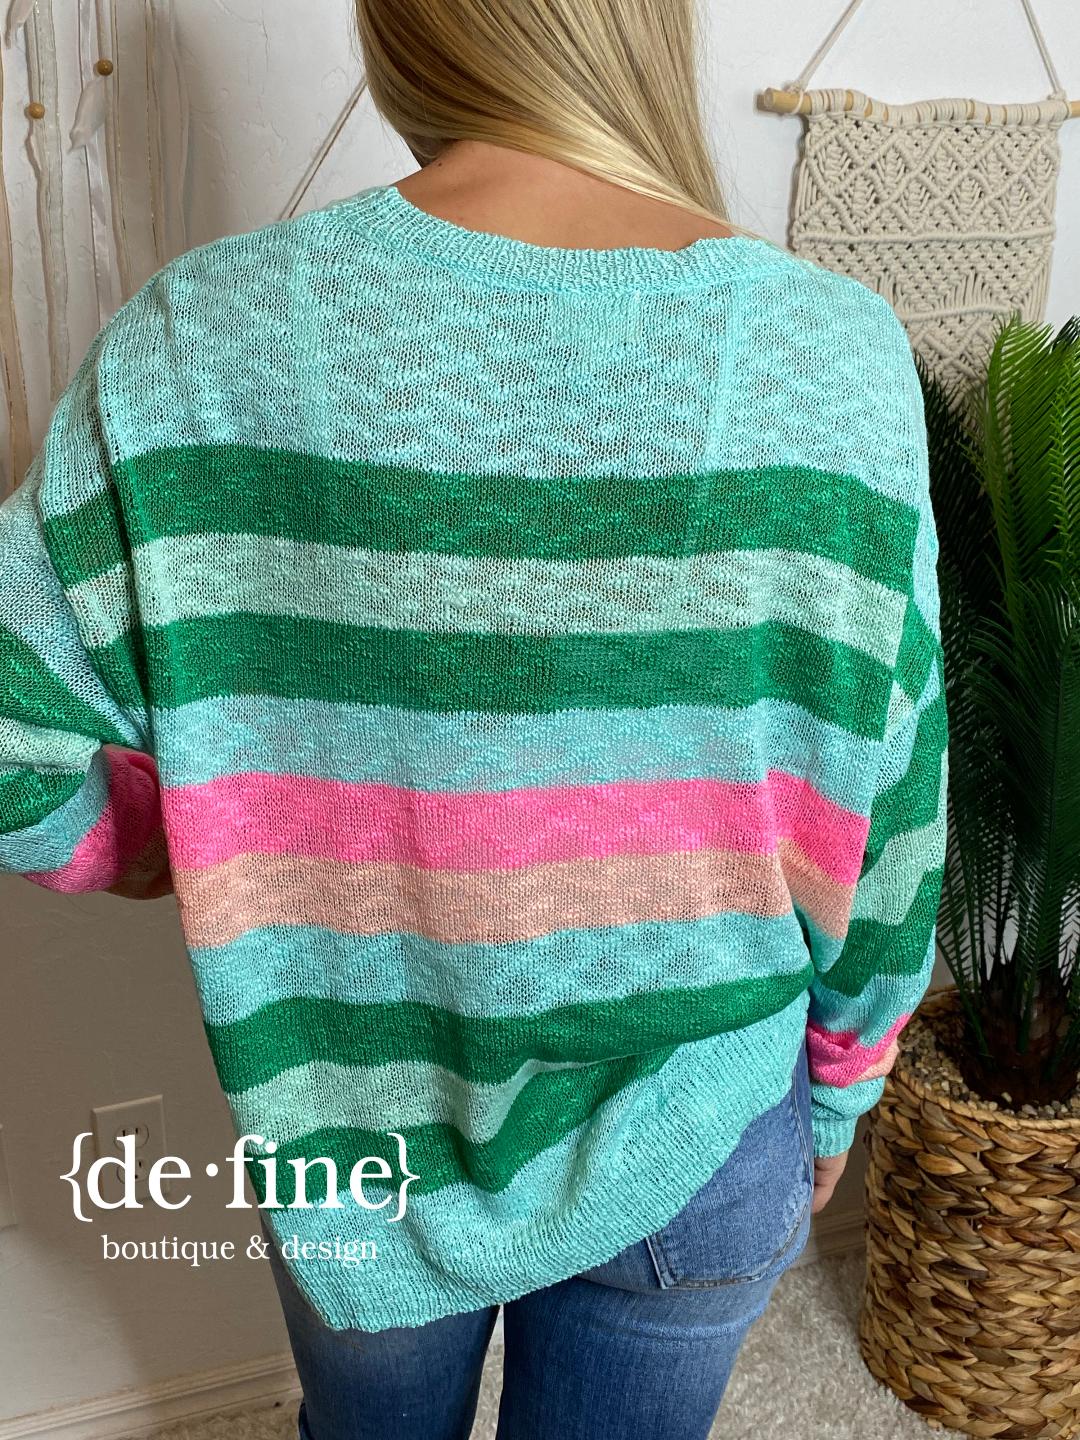 Wildest Dreams Colorful Striped Summer Sweater